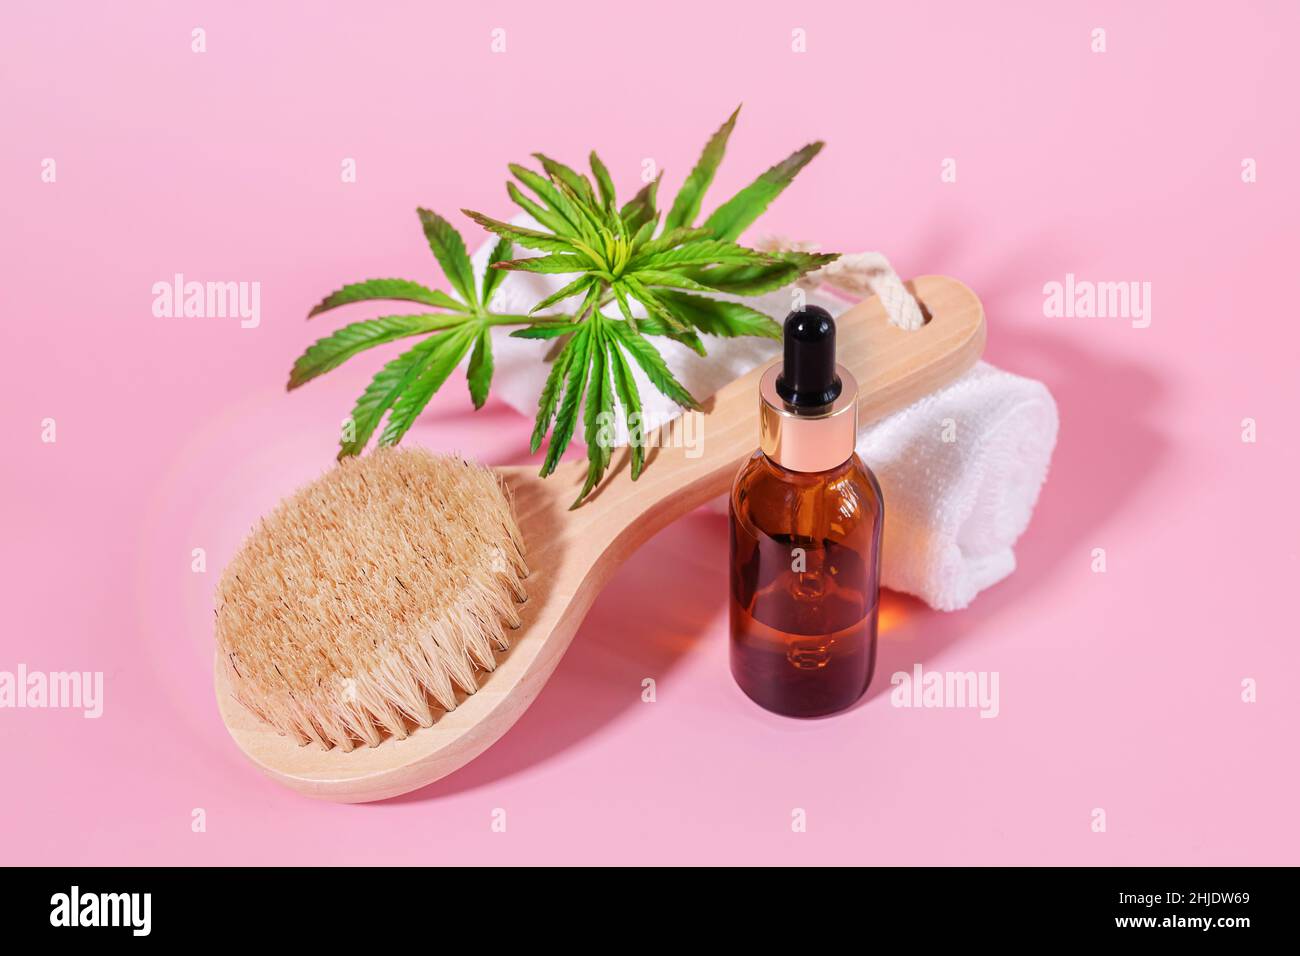 Black glass unbranded bottles of cosmetic oil and cannabis essential oil and a wooden facial cleansing brush with natural bristles. Natural skin care Stock Photo